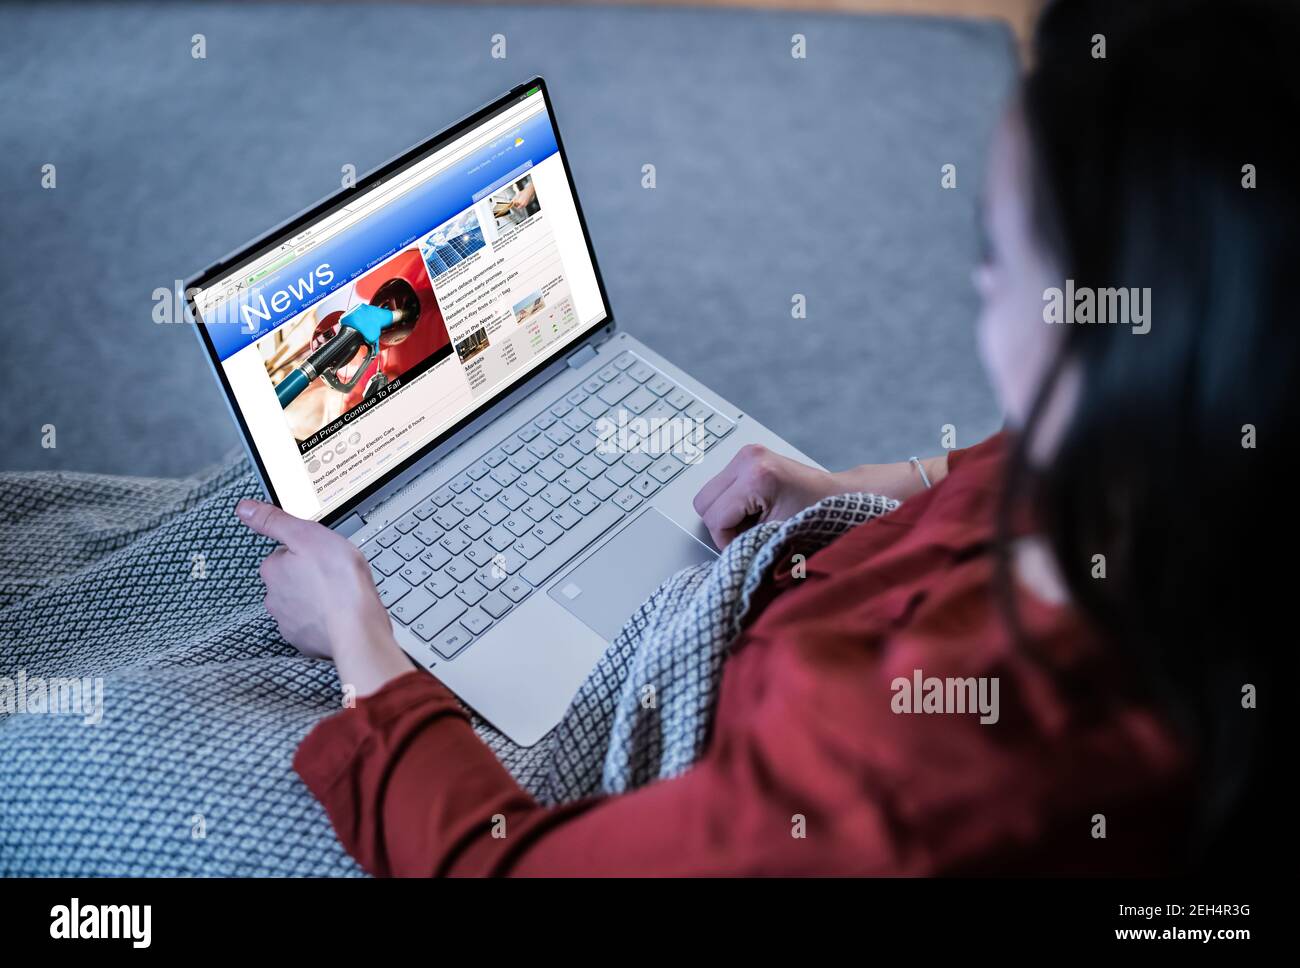 Watching News Articles On Laptop Online At Night Stock Photo